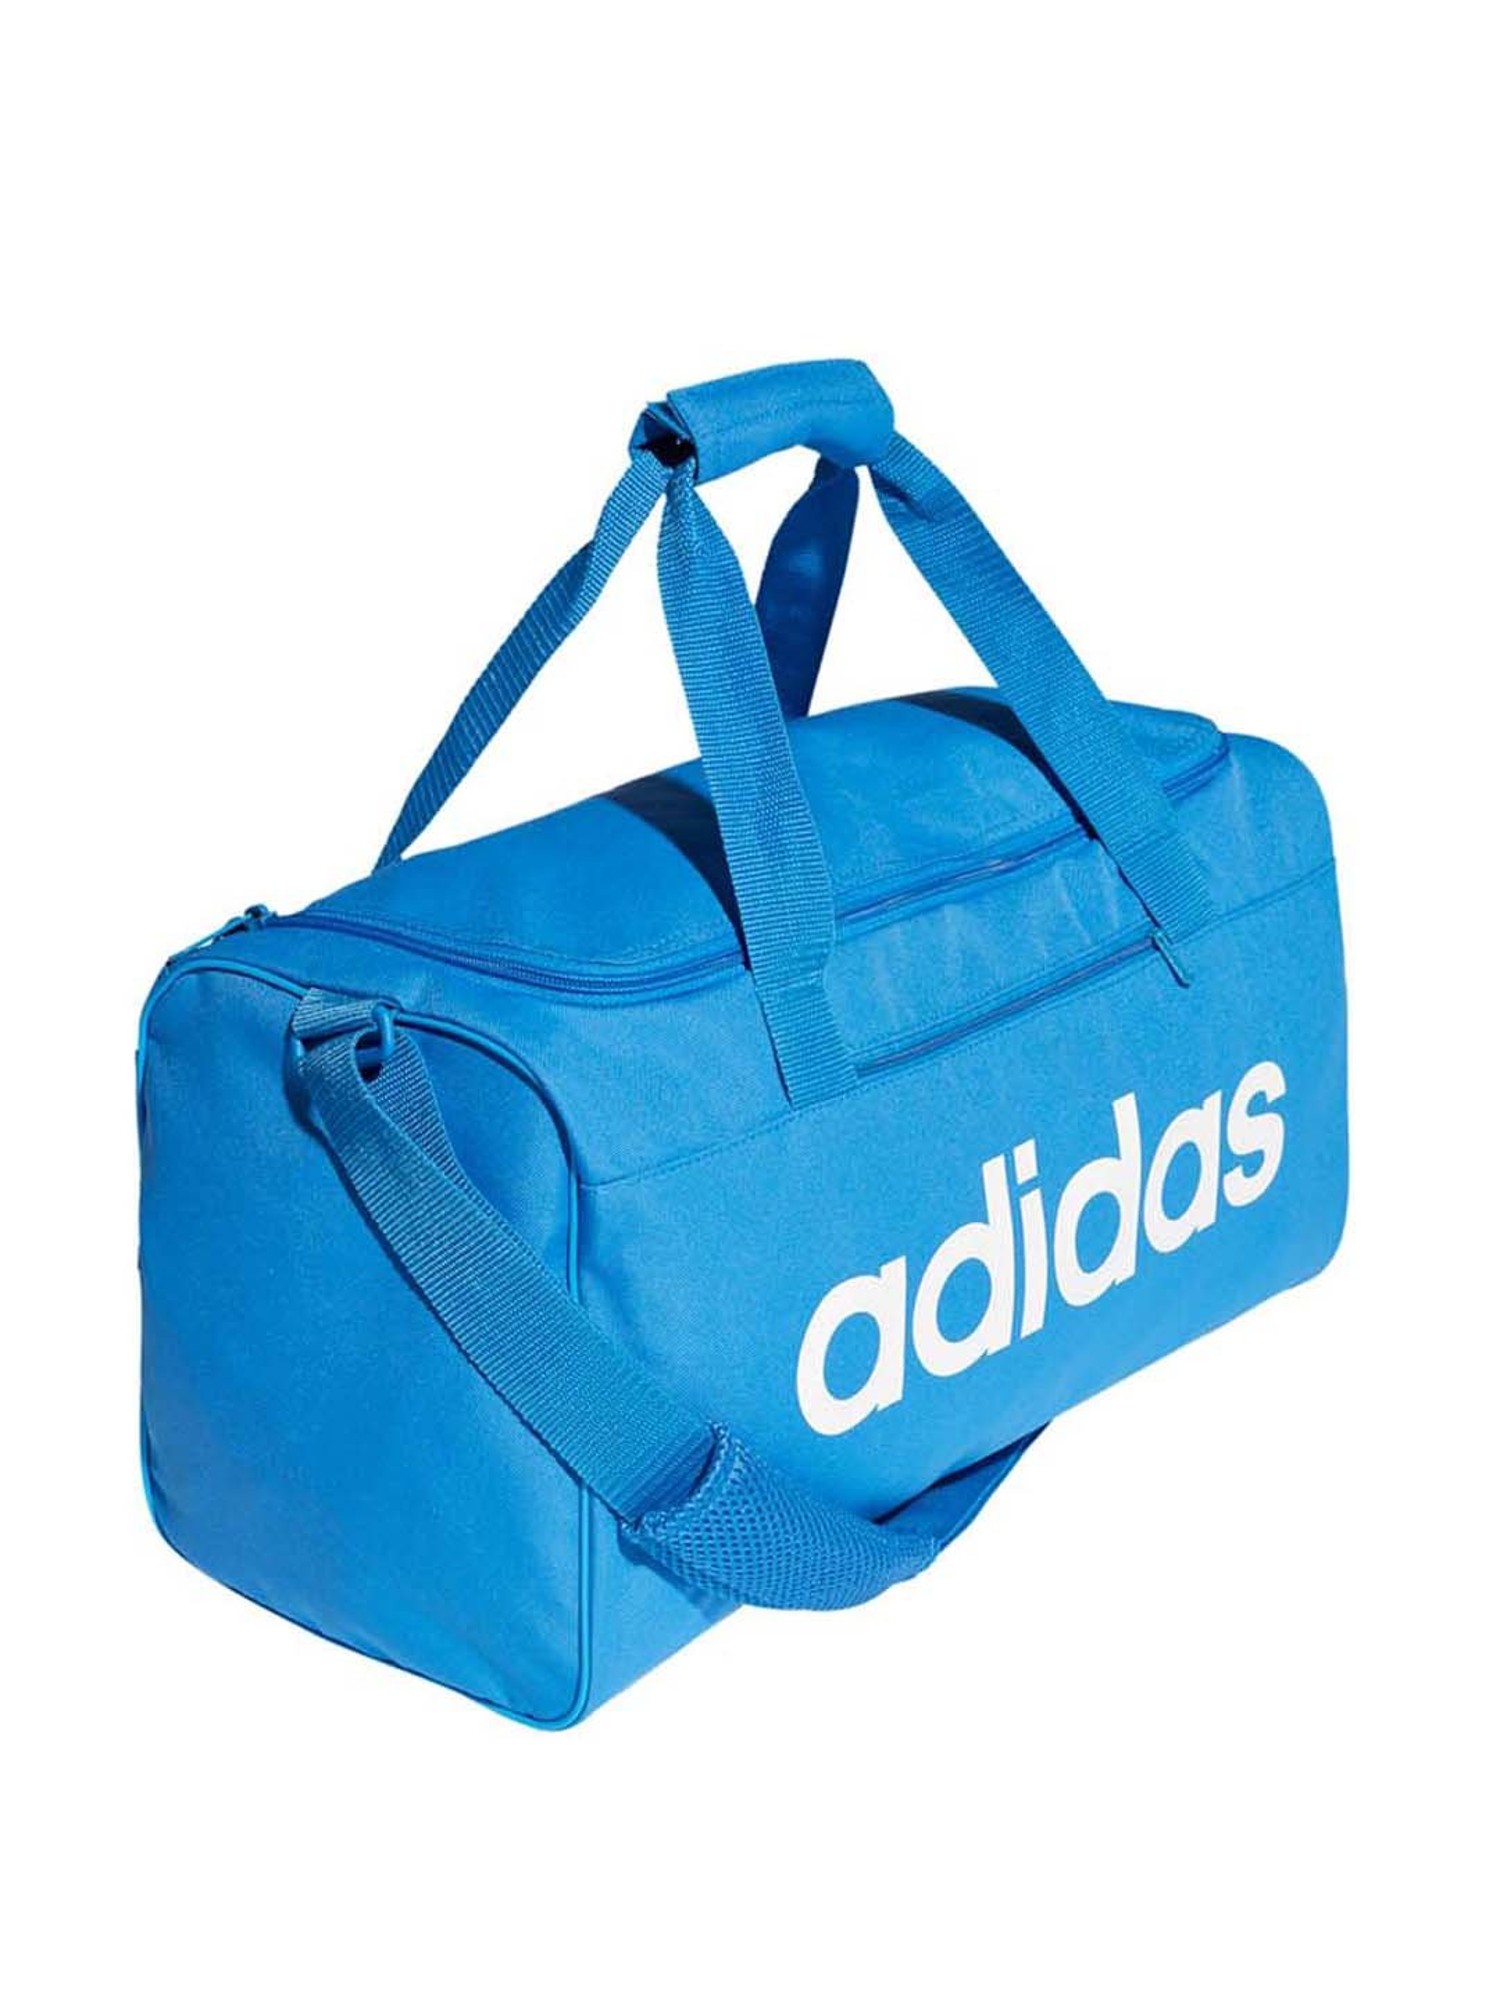 Adidas Sportswear LINEAR DUFFEL L Black  White  Fast delivery  Spartoo  Europe   Bags Sports bags 4400 